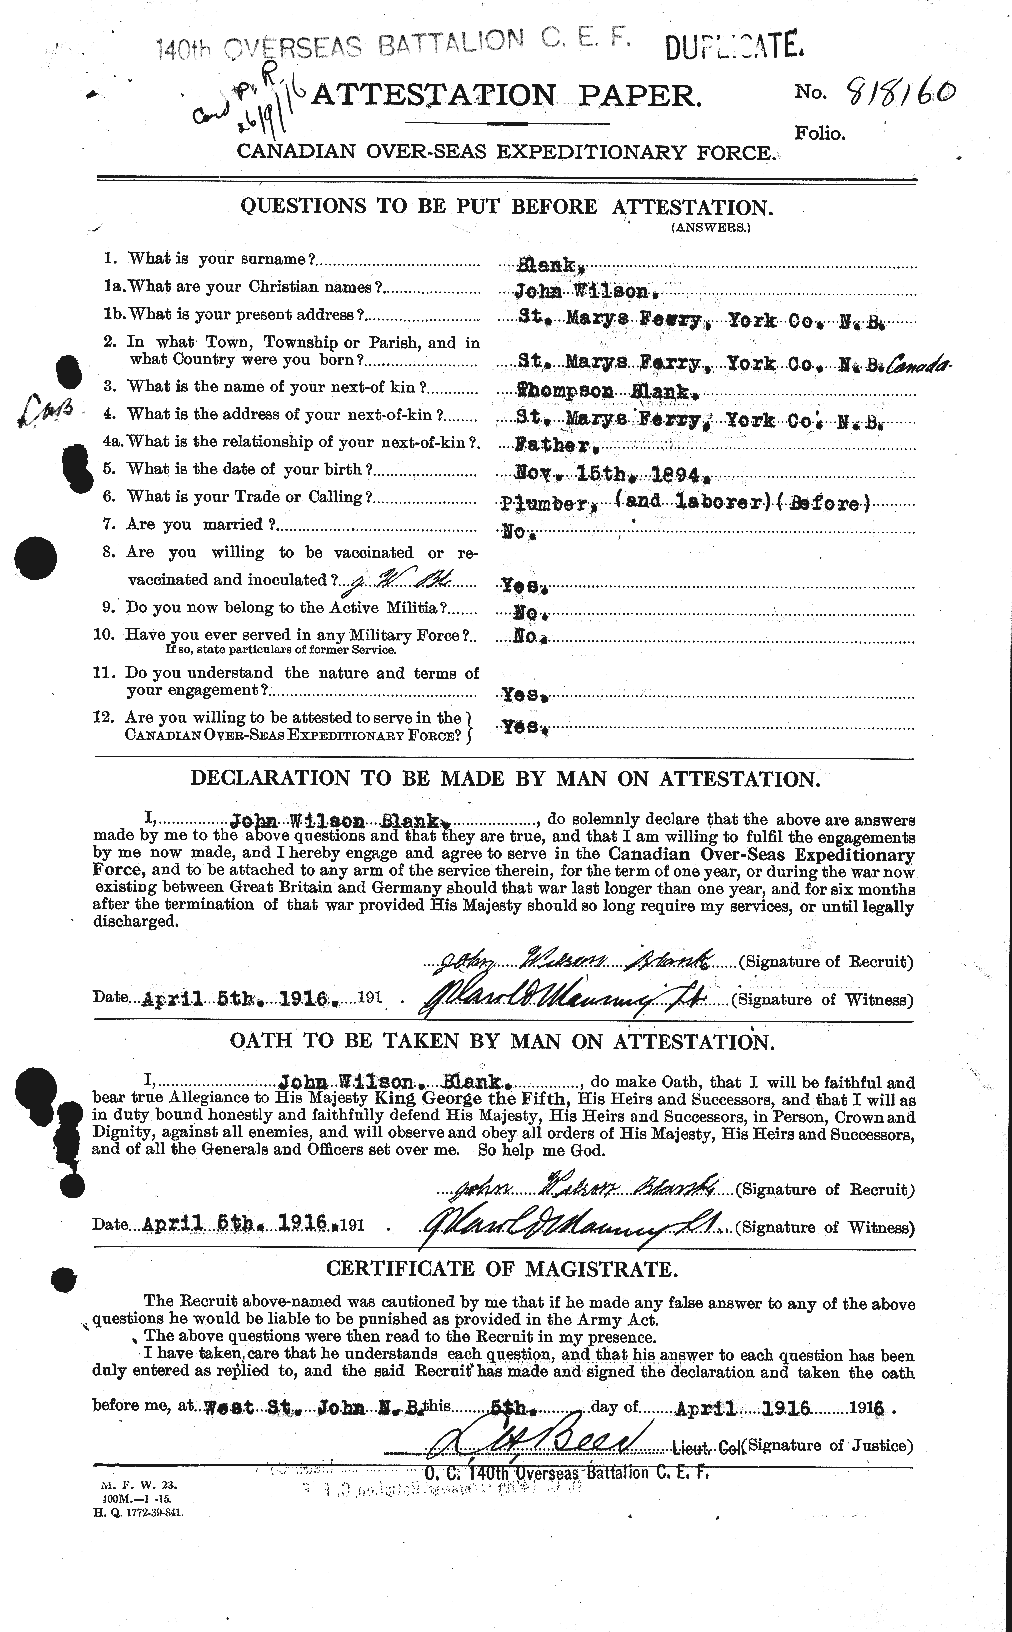 Personnel Records of the First World War - CEF 247753a